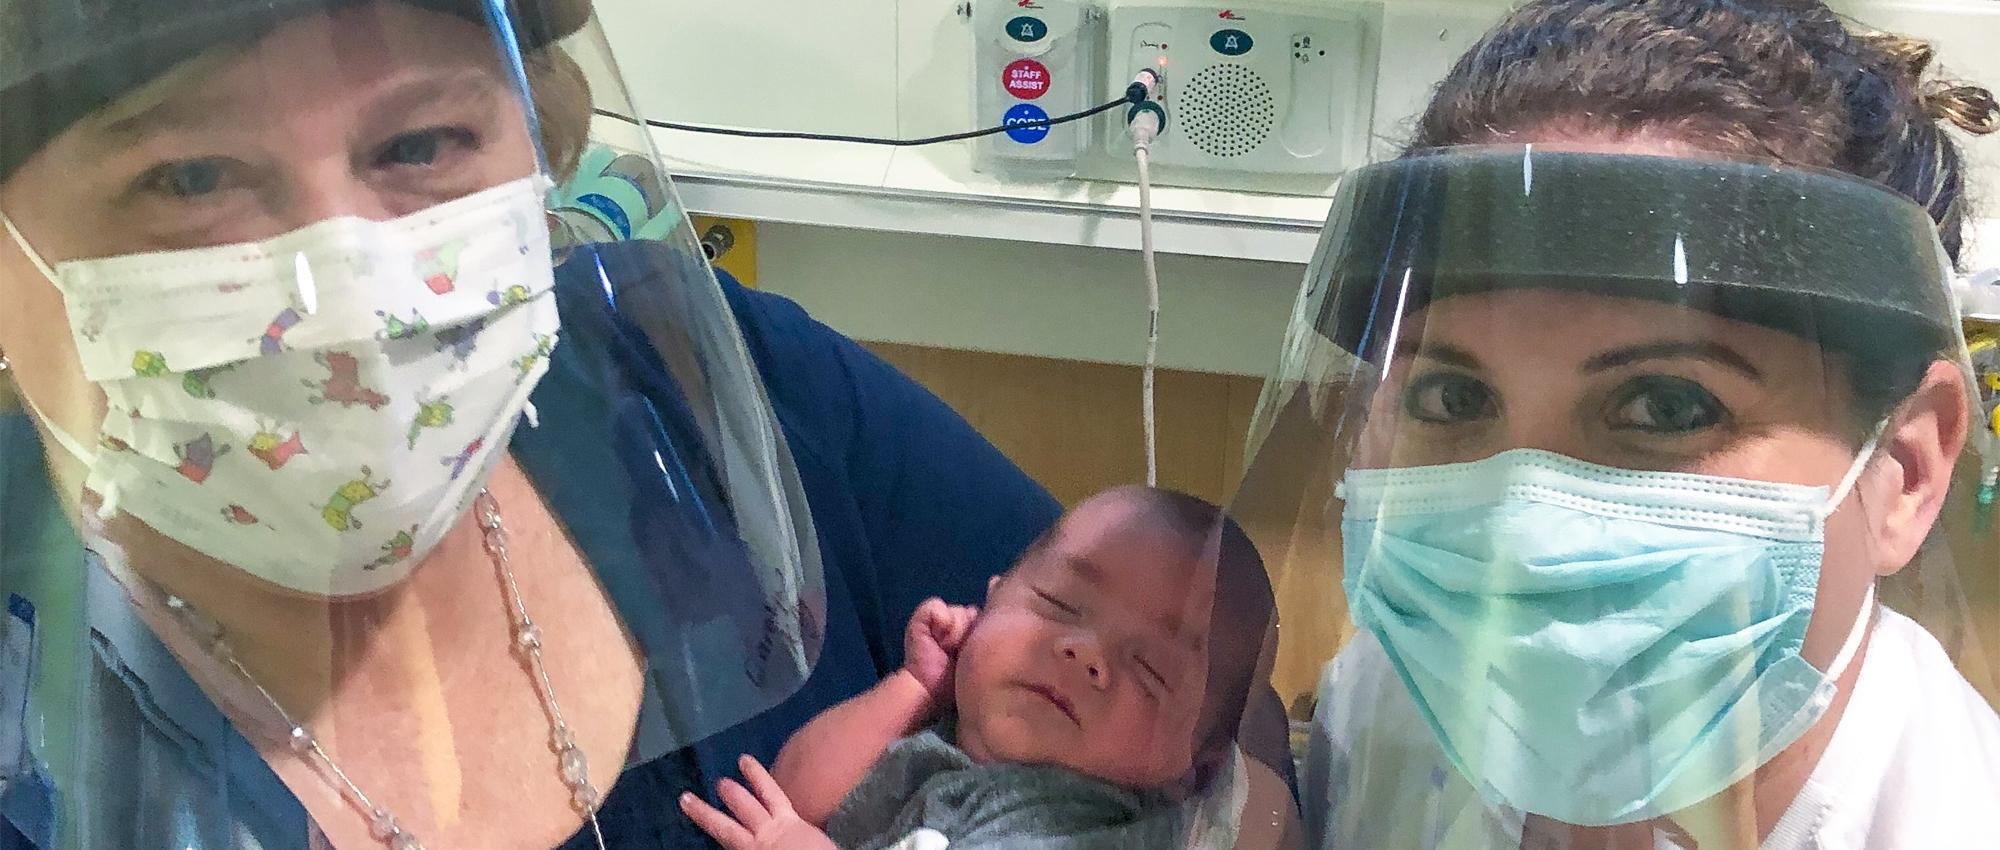 Close up image of Nurse practitioner Carolyn Kelly, Anna Patten and her infant son John-Derrick who required a blood transfusion. Both Carolyn and Anna are wearing masks and shields.